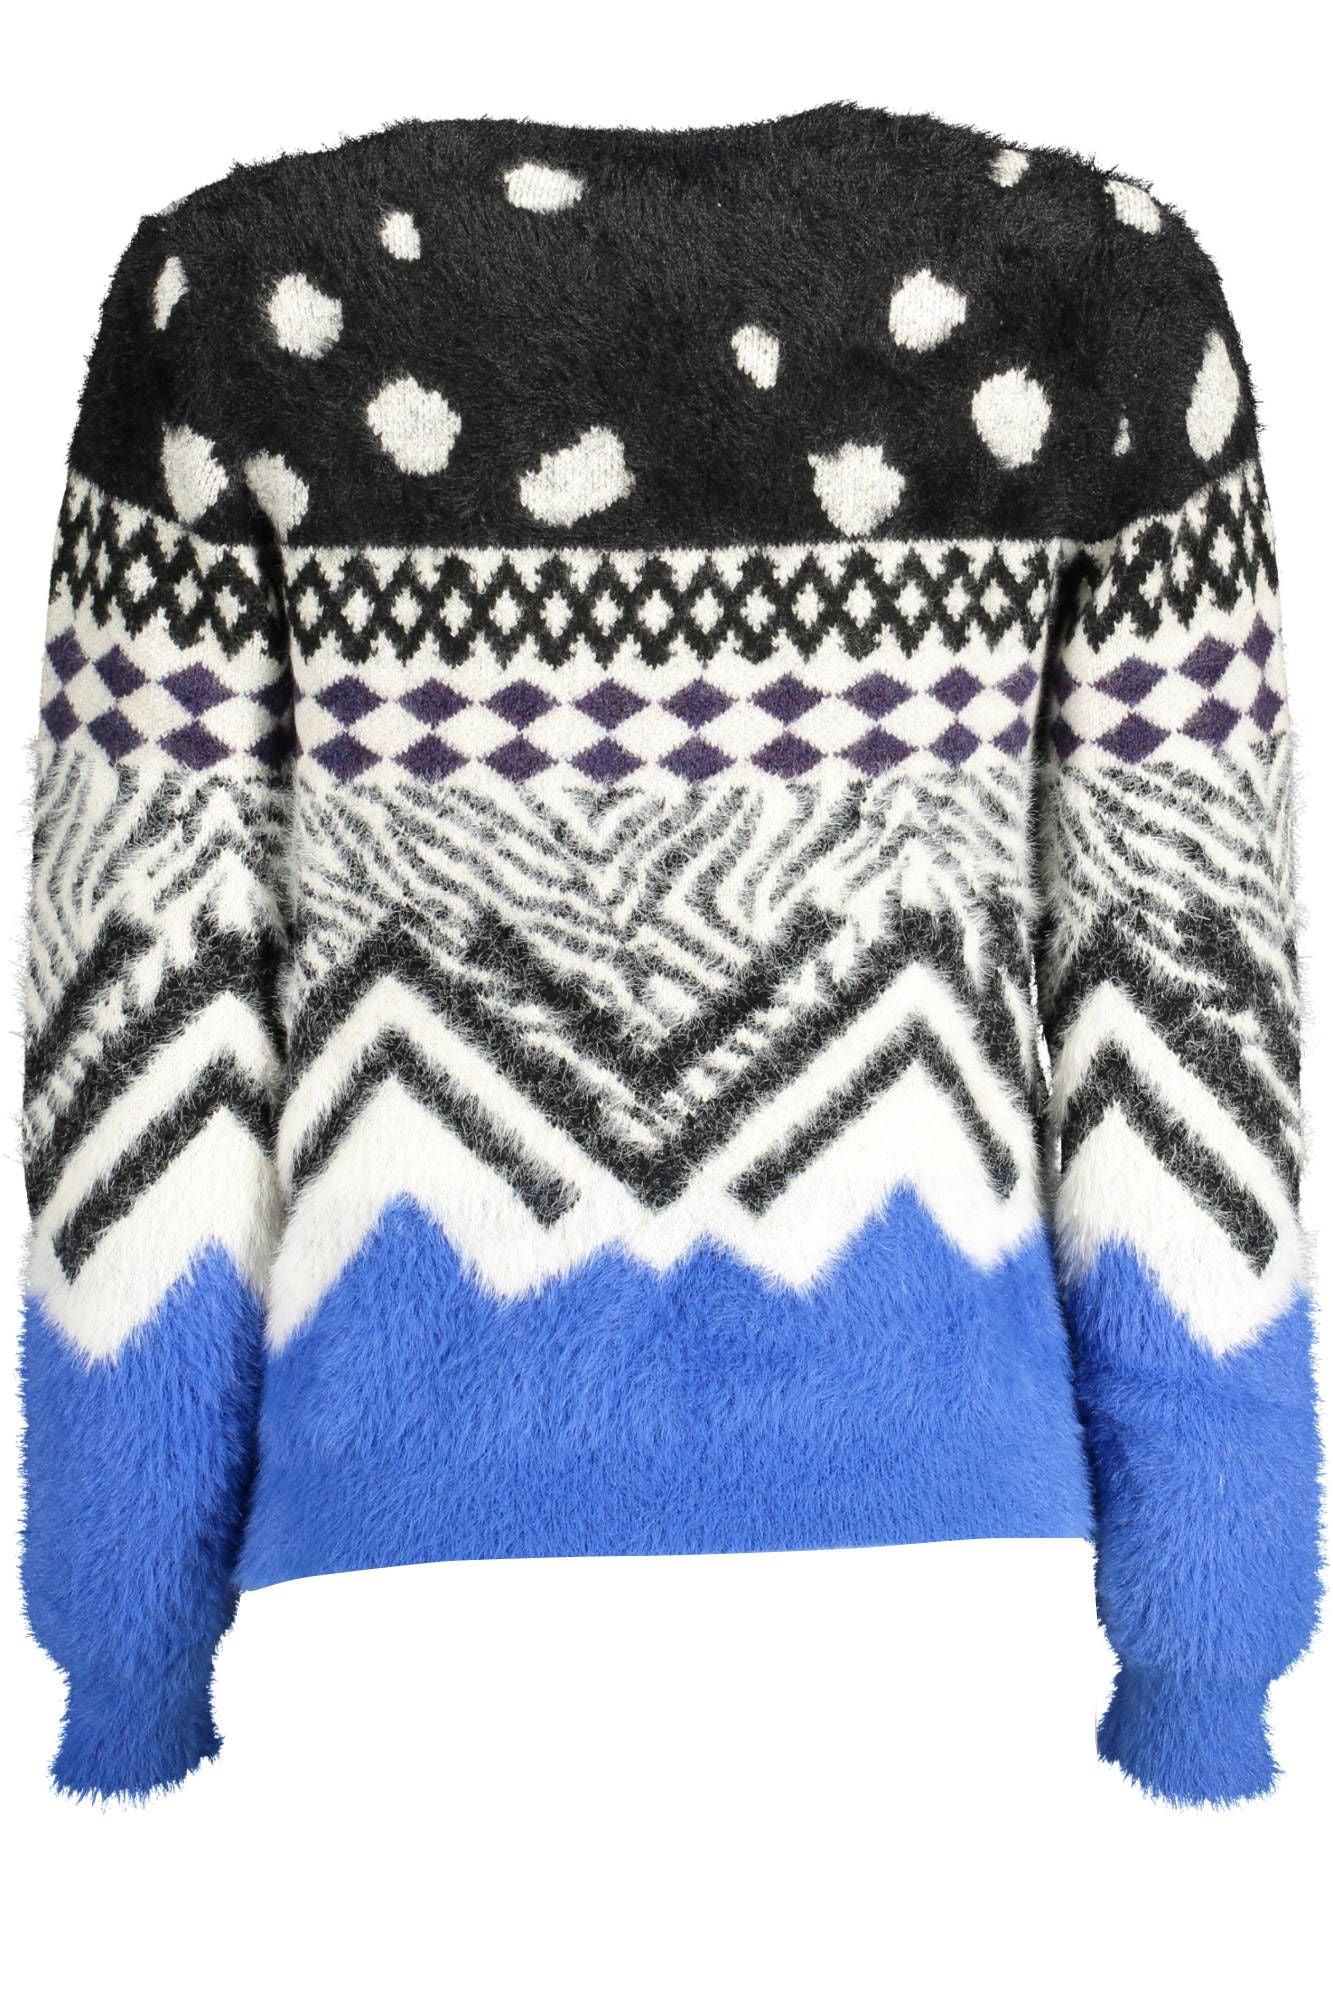 Desigual Chic Contrasting Detail Long-Sleeve Top